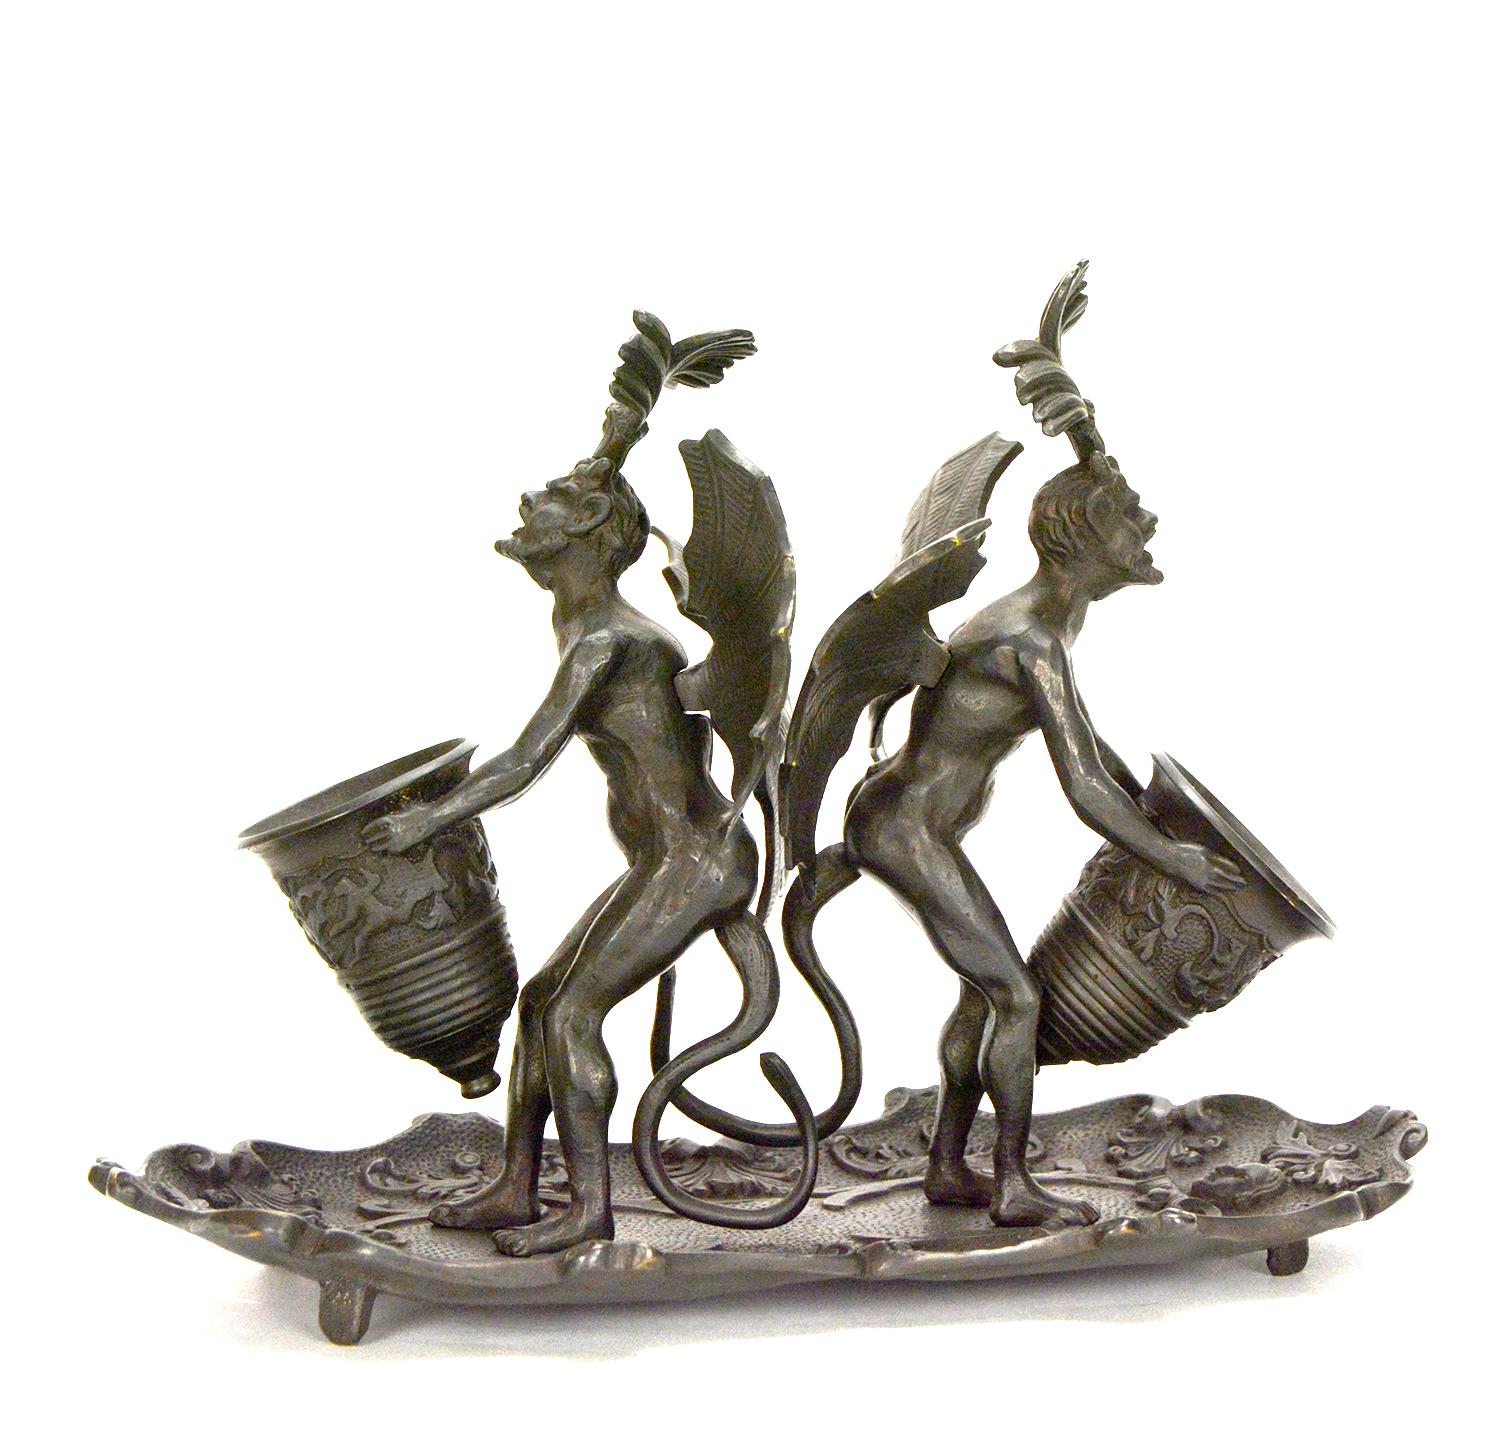 This is a rare massive double Devil figure desk tray match holder. The winged devils are holding a large vase in front of their chest. The vase can be used to store matches. The pair Devils stand on a high relief floral tray, which can be used as